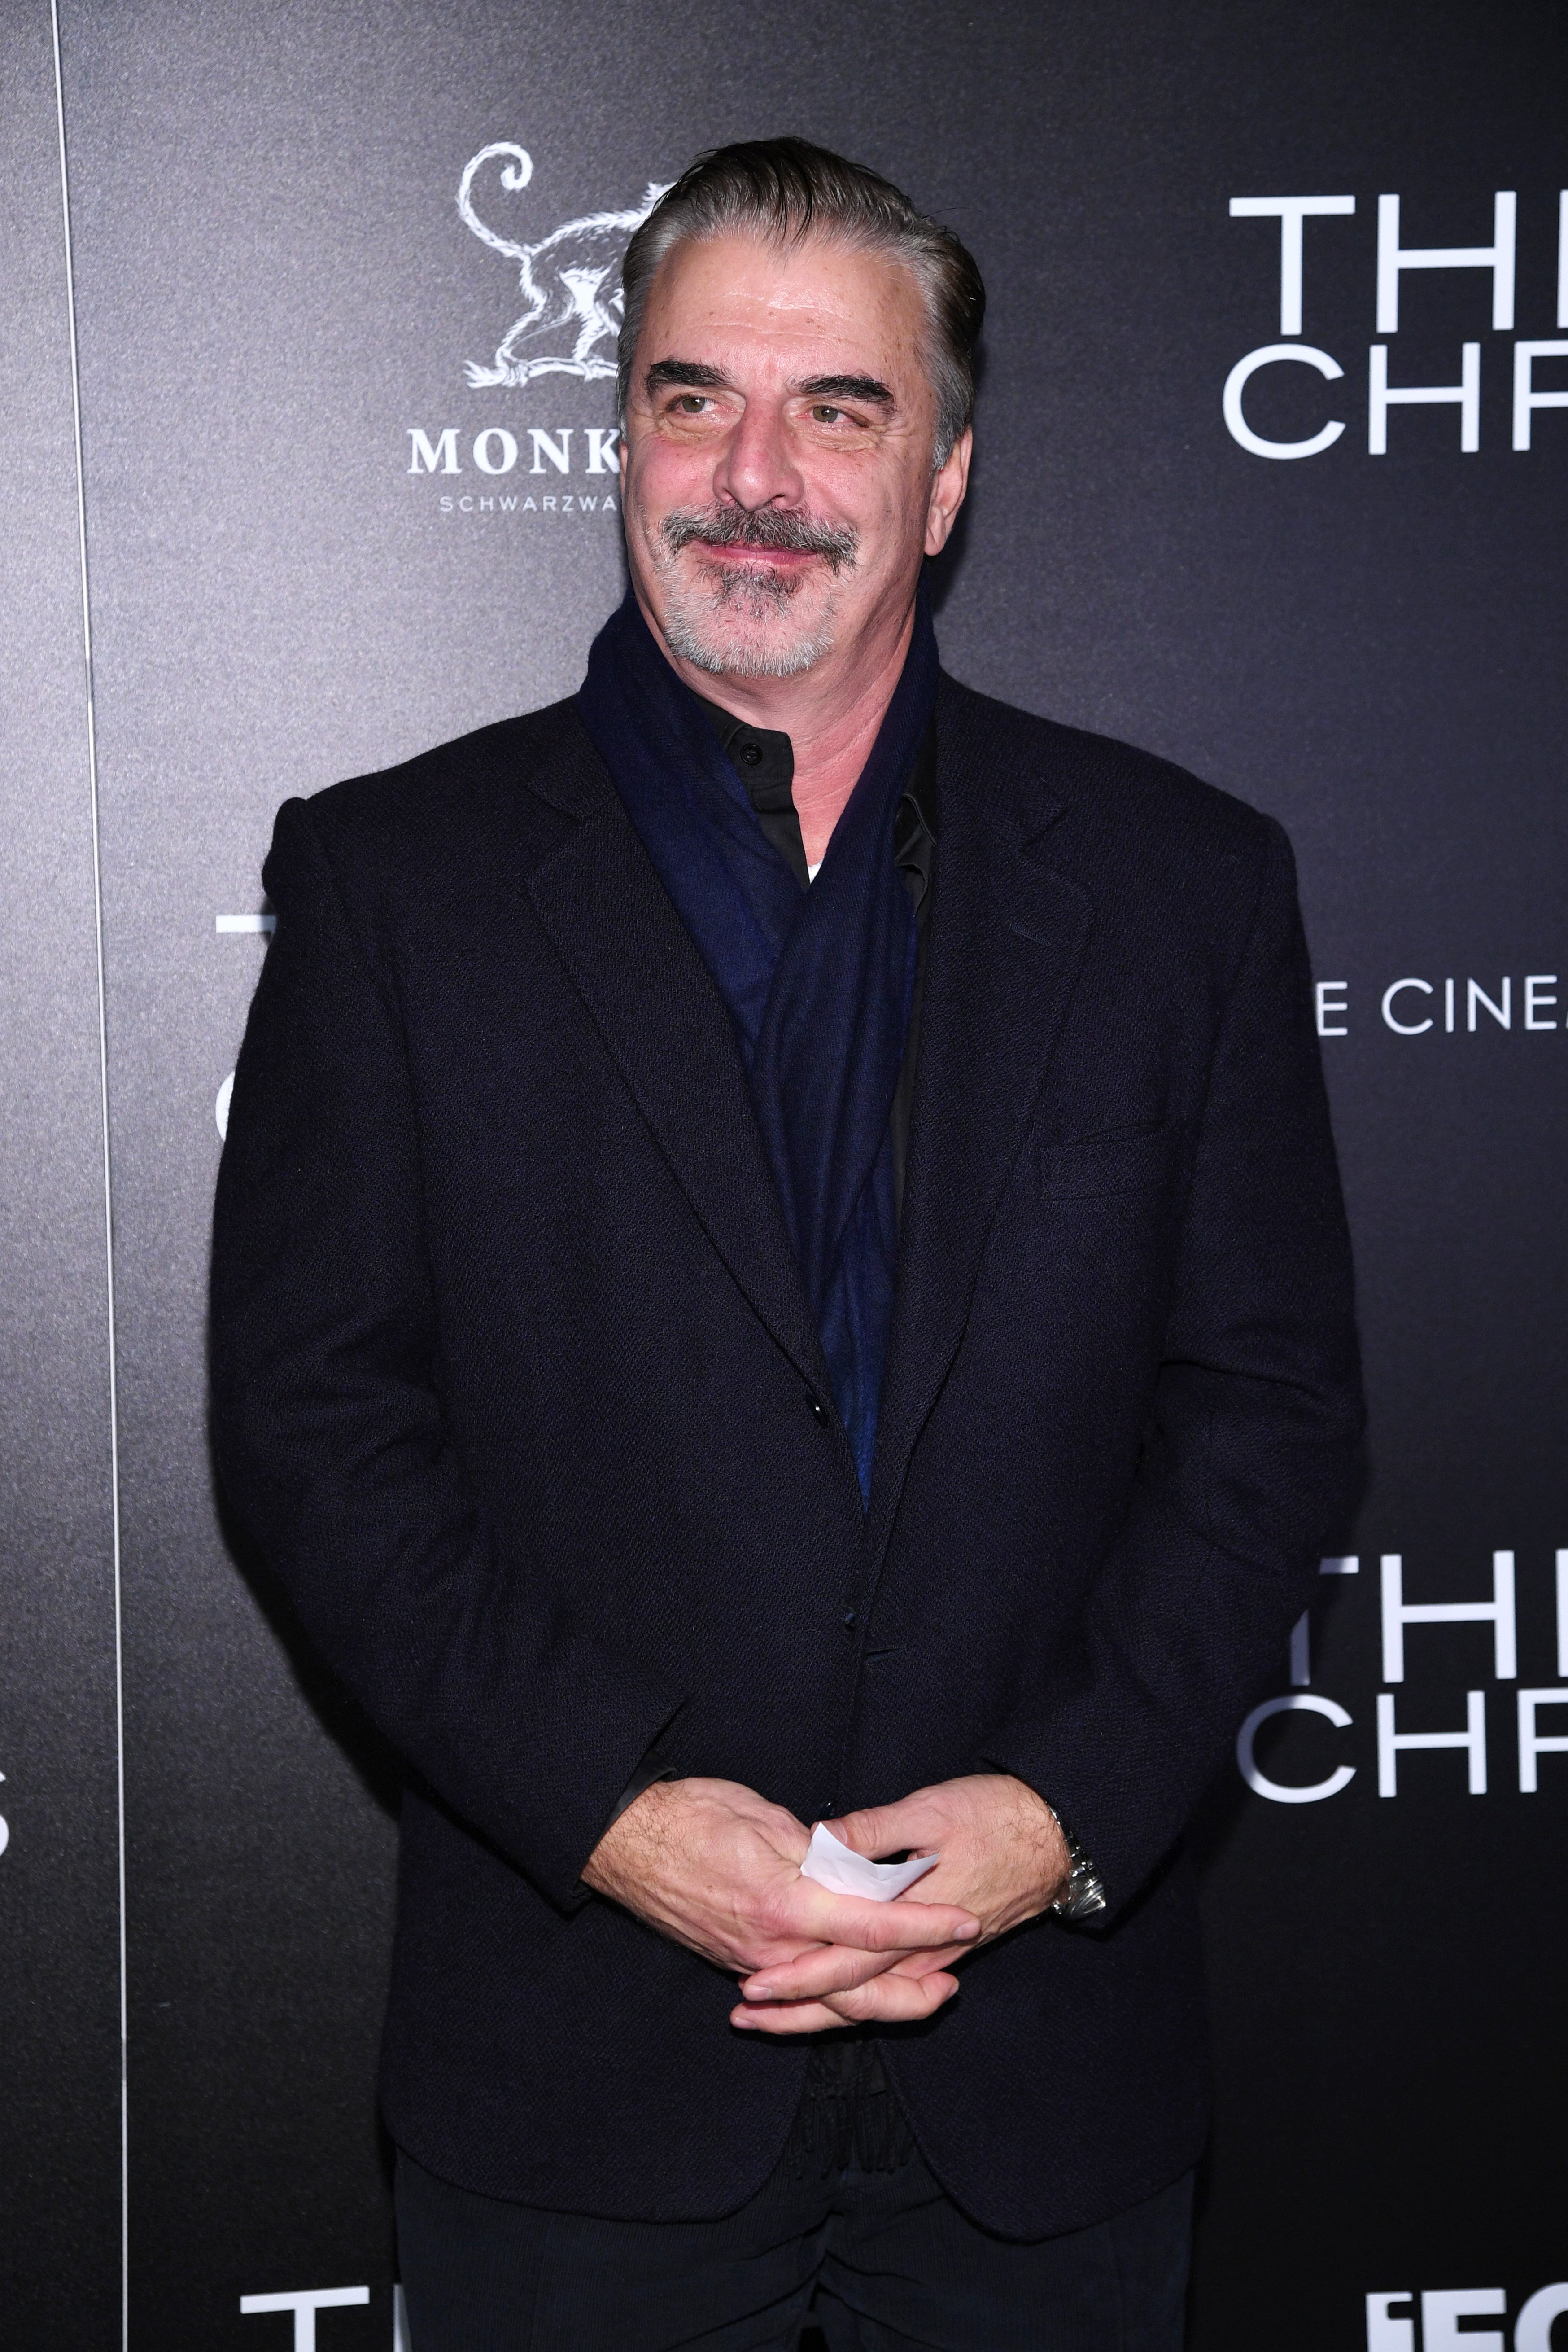 Chris Noth spotted at the screening of "Three Christs" in New York in January, 2020. | Photo: Getty Images.